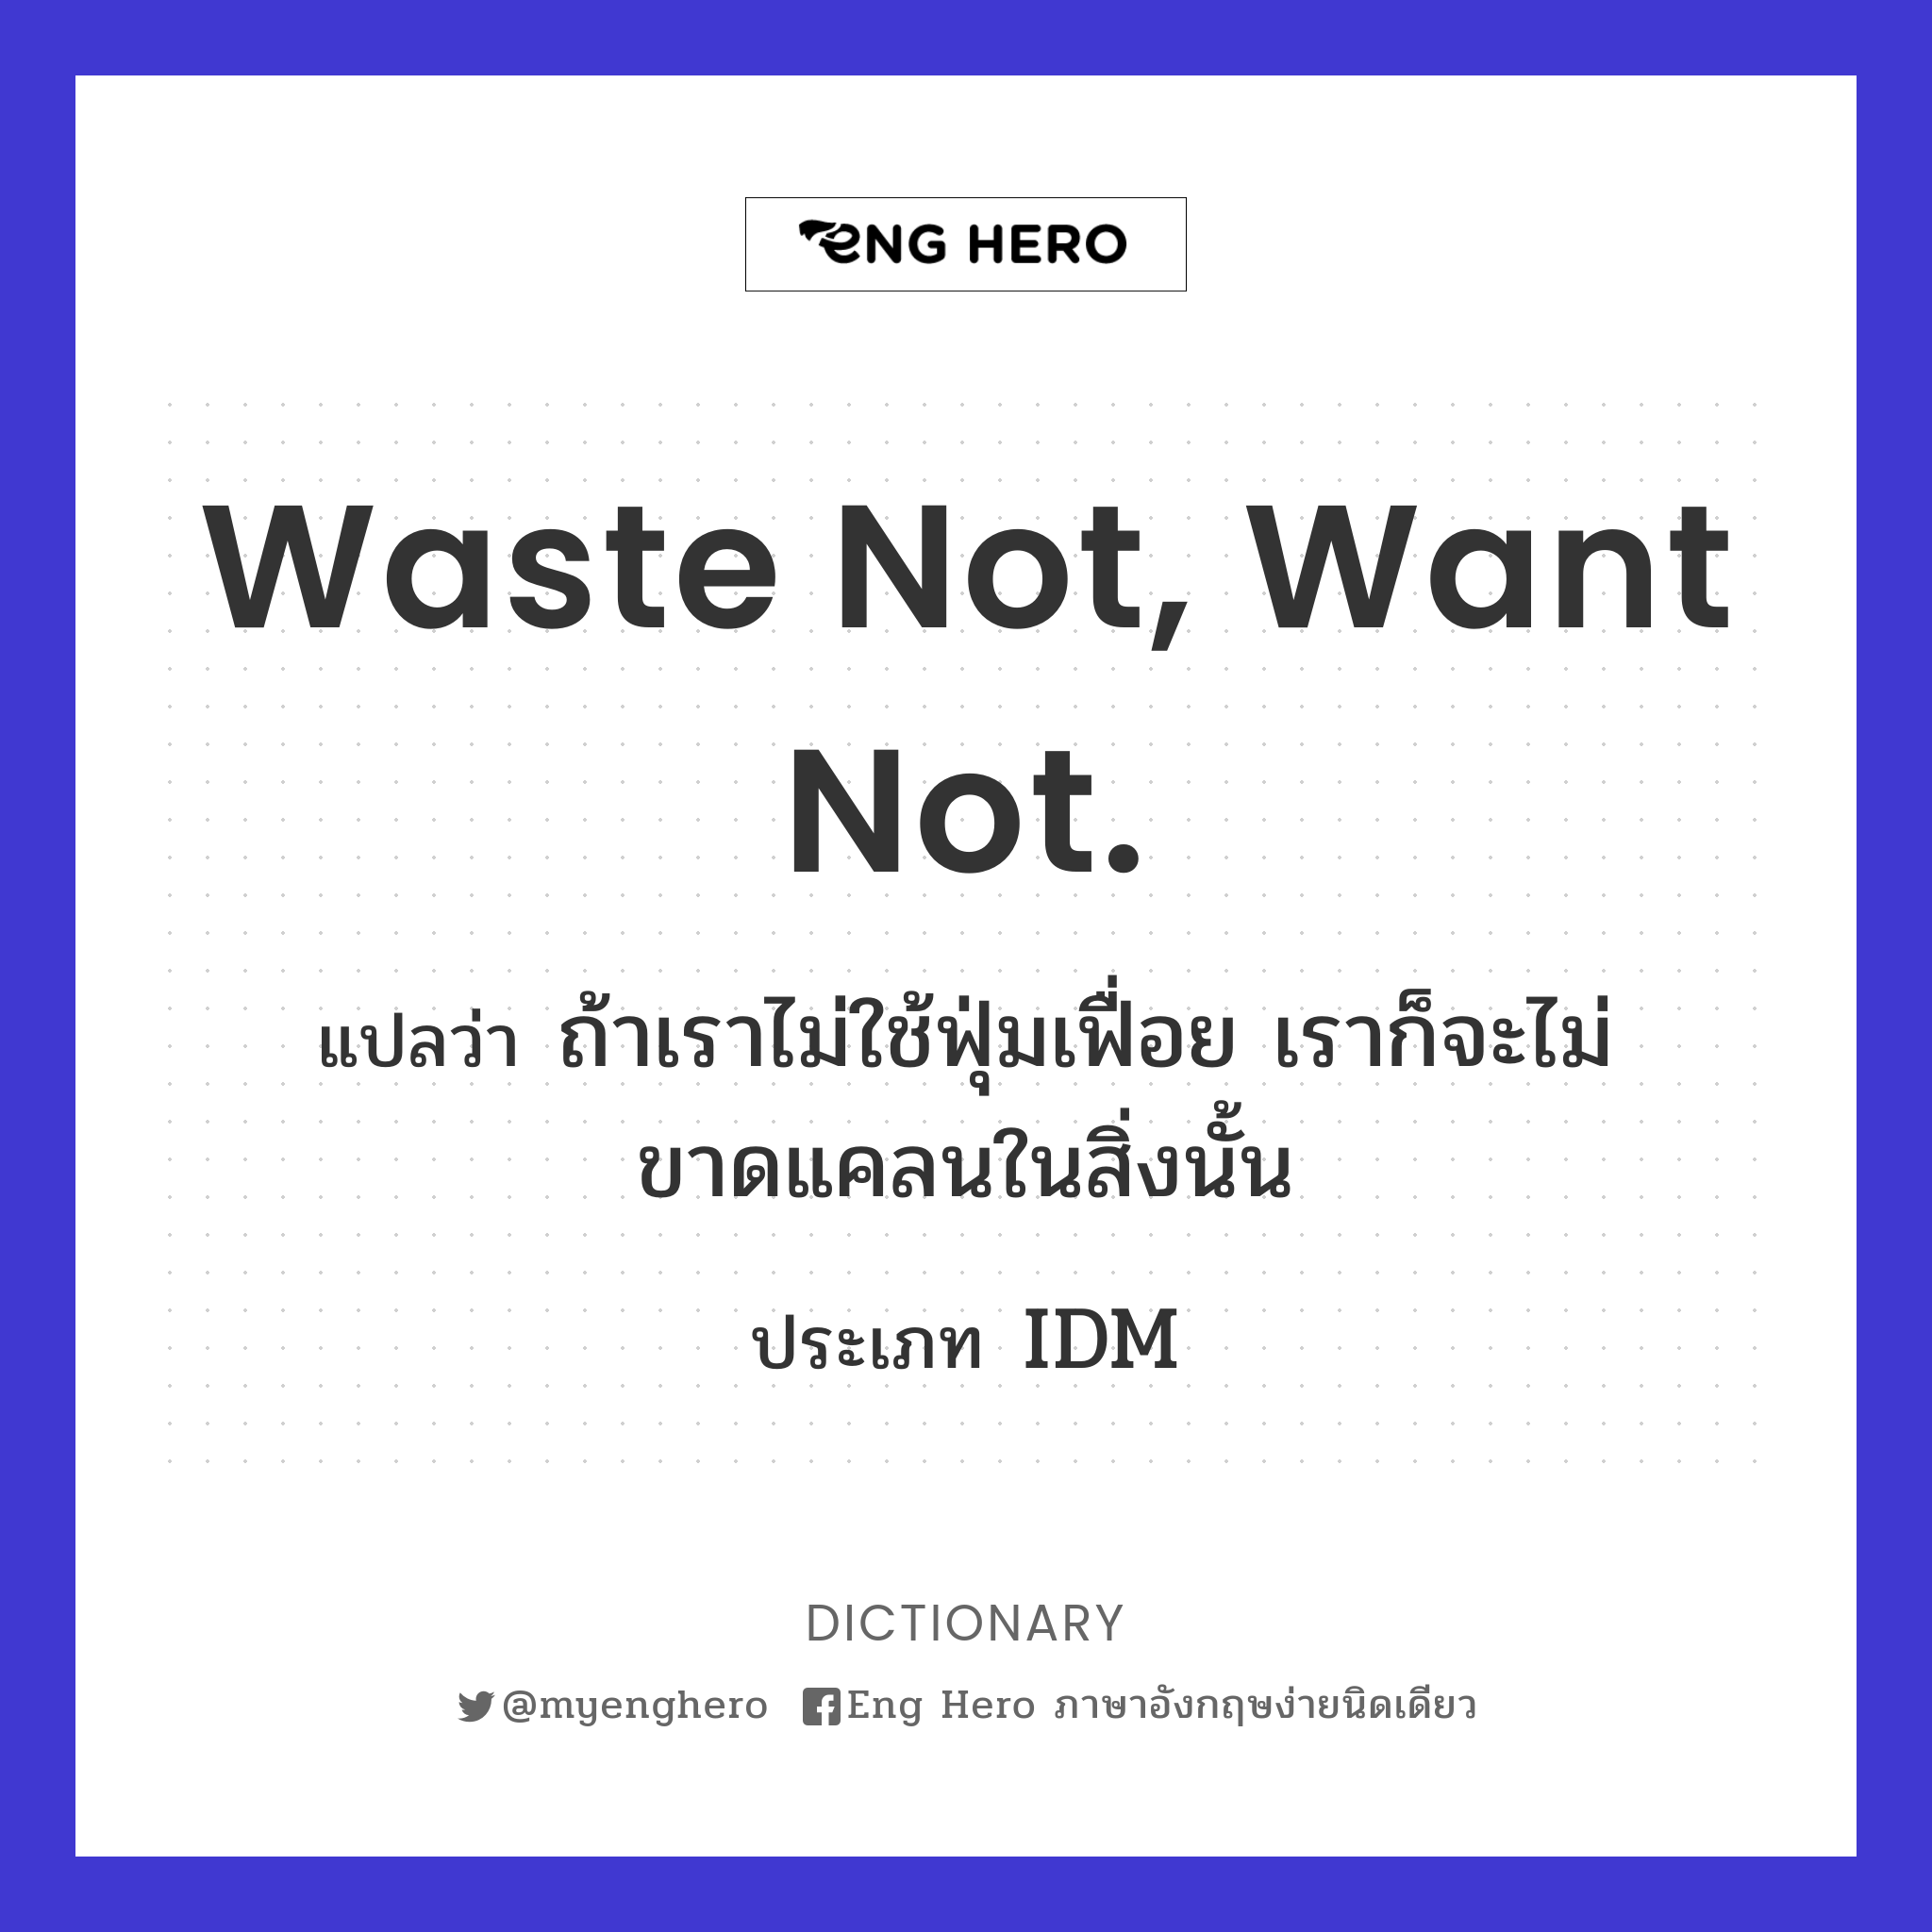 Waste not, want not.